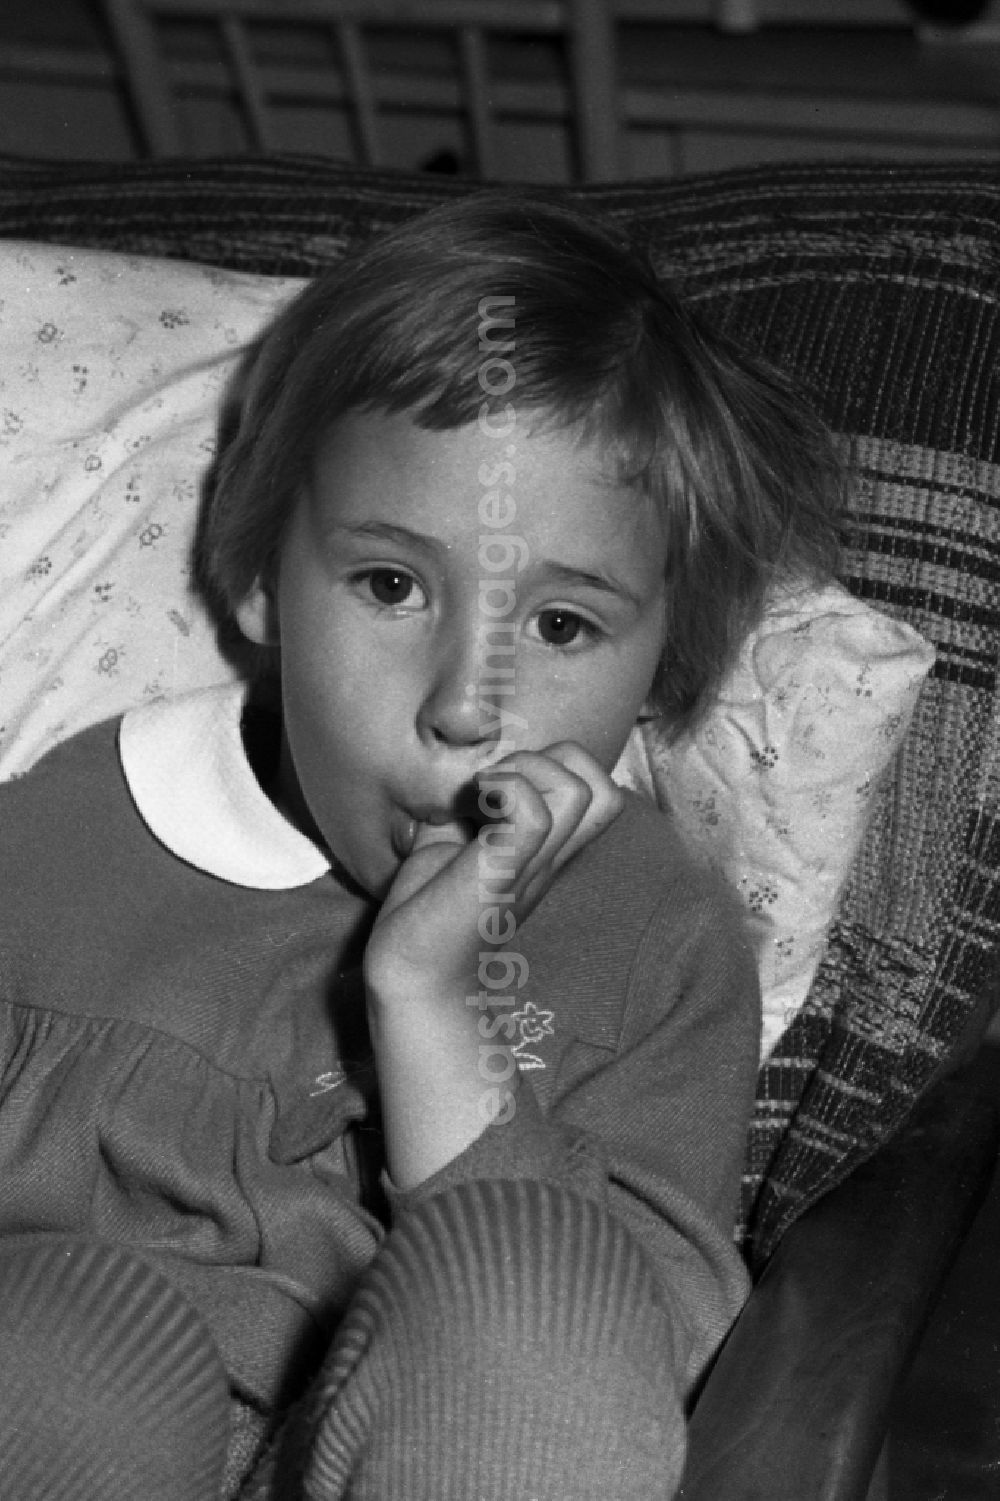 GDR image archive: Merseburg - Child sucks at the thumb in Merseburg in the federal state Saxony-Anhalt in the area of the former GDR, German democratic republic